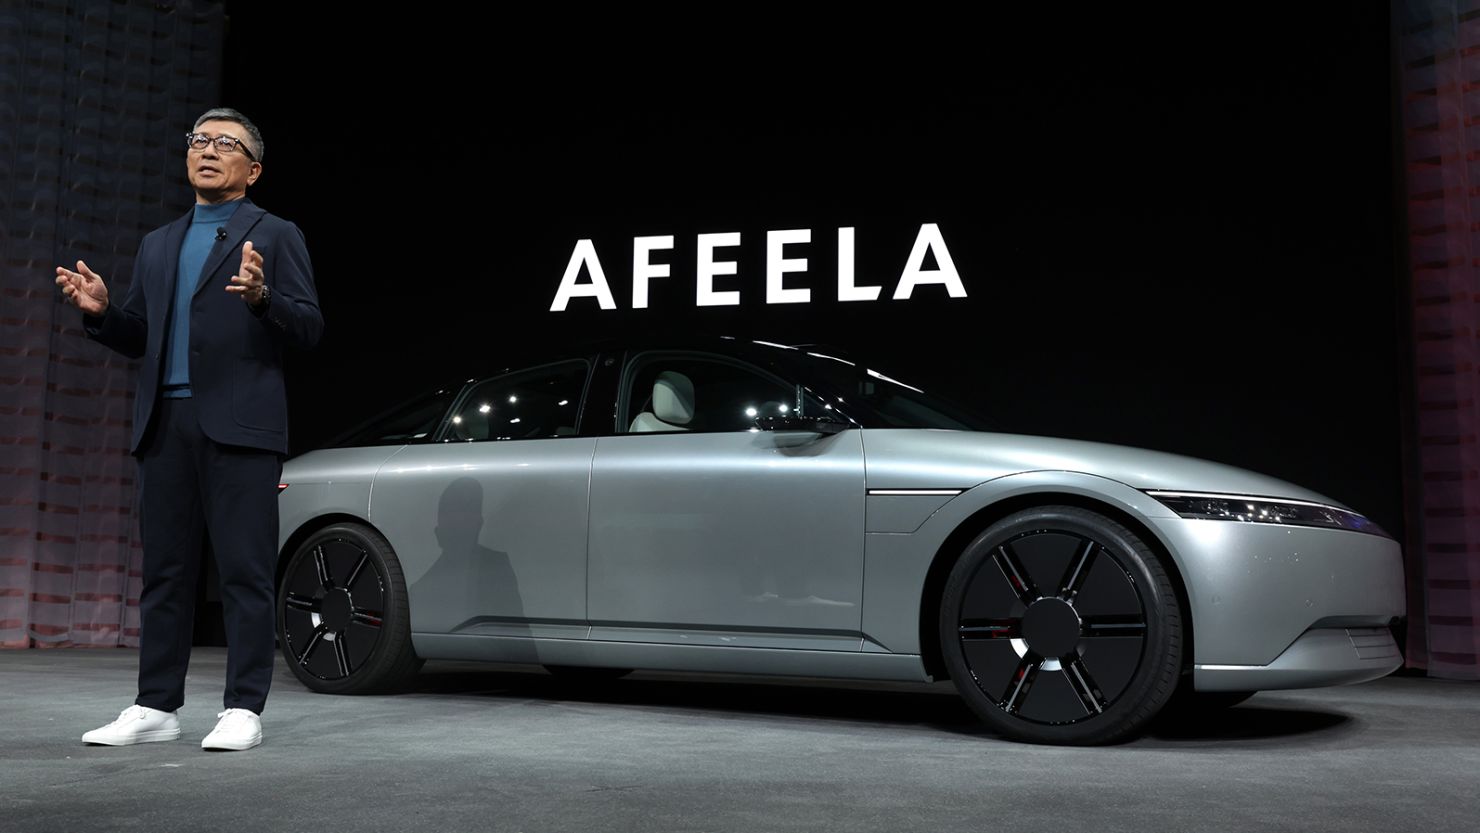 Sony Honda Mobility CEO Yasuhide Mizuno in front of an Afeela concept vehicle during a press event at CES 2023 at the Mandalay Bay Convention Center on January 04, 2023 in Las Vegas, Nevada. 